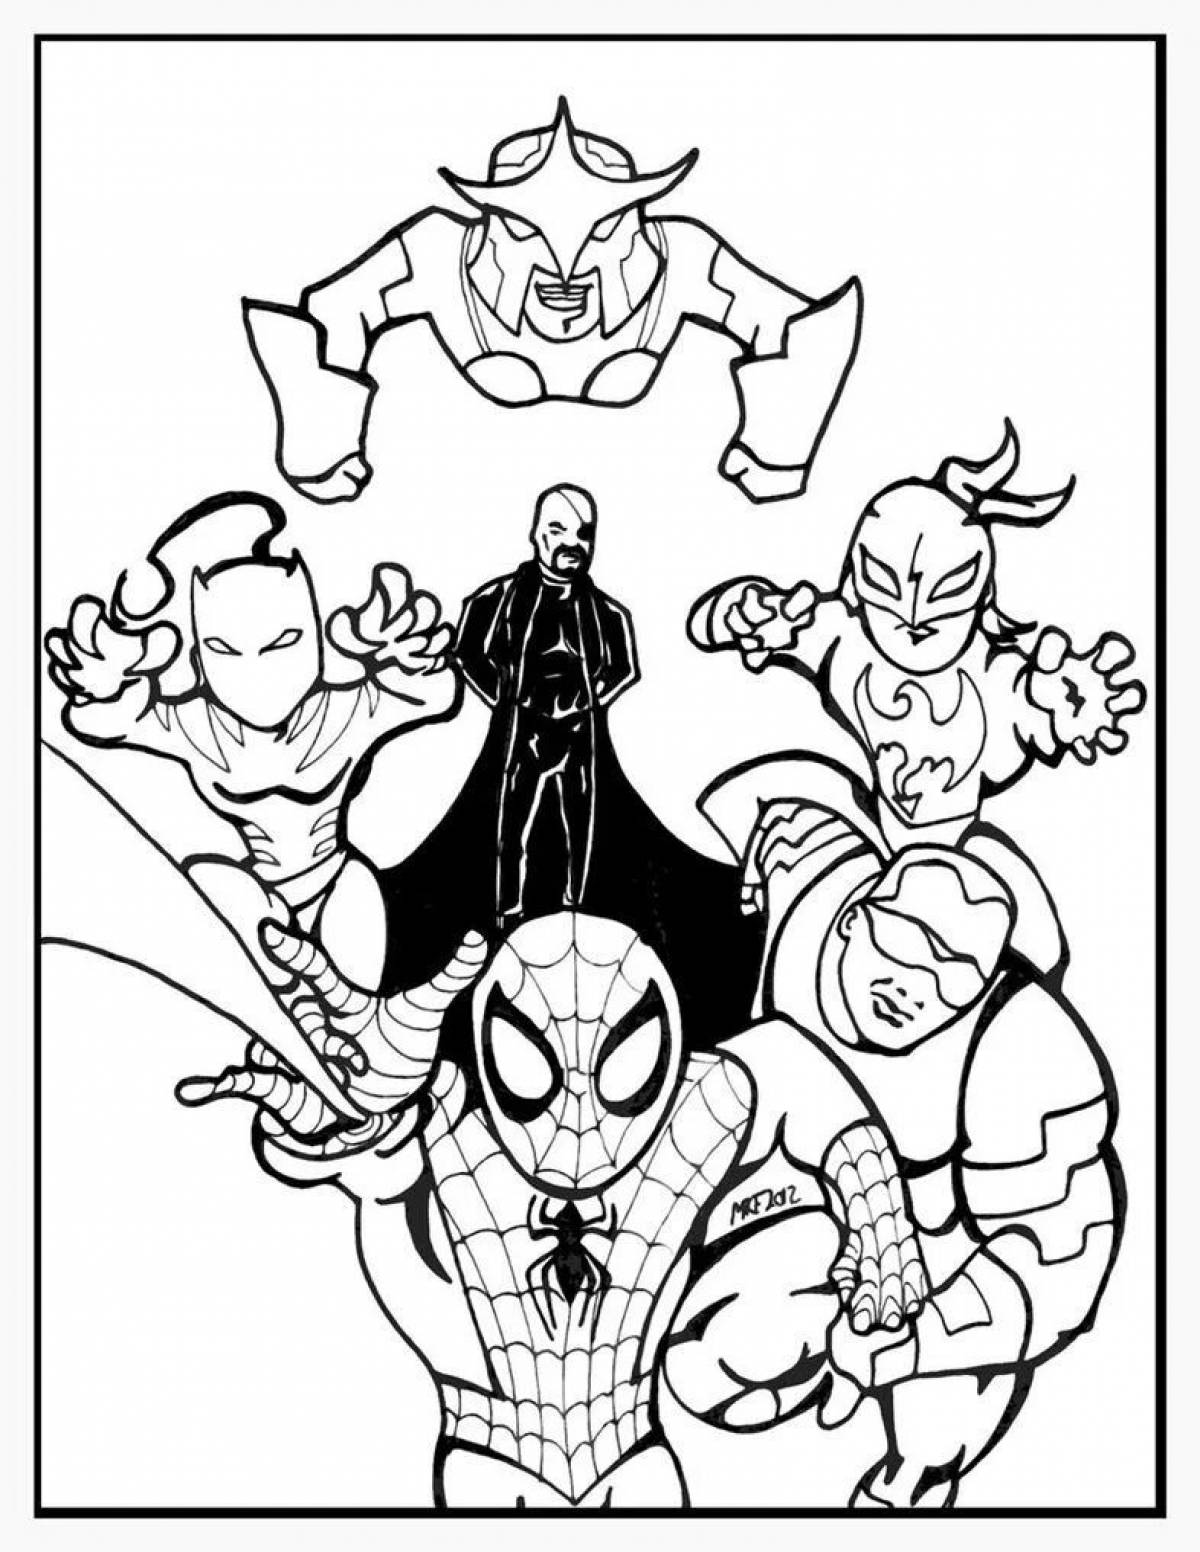 Spider-Man friendly team coloring page